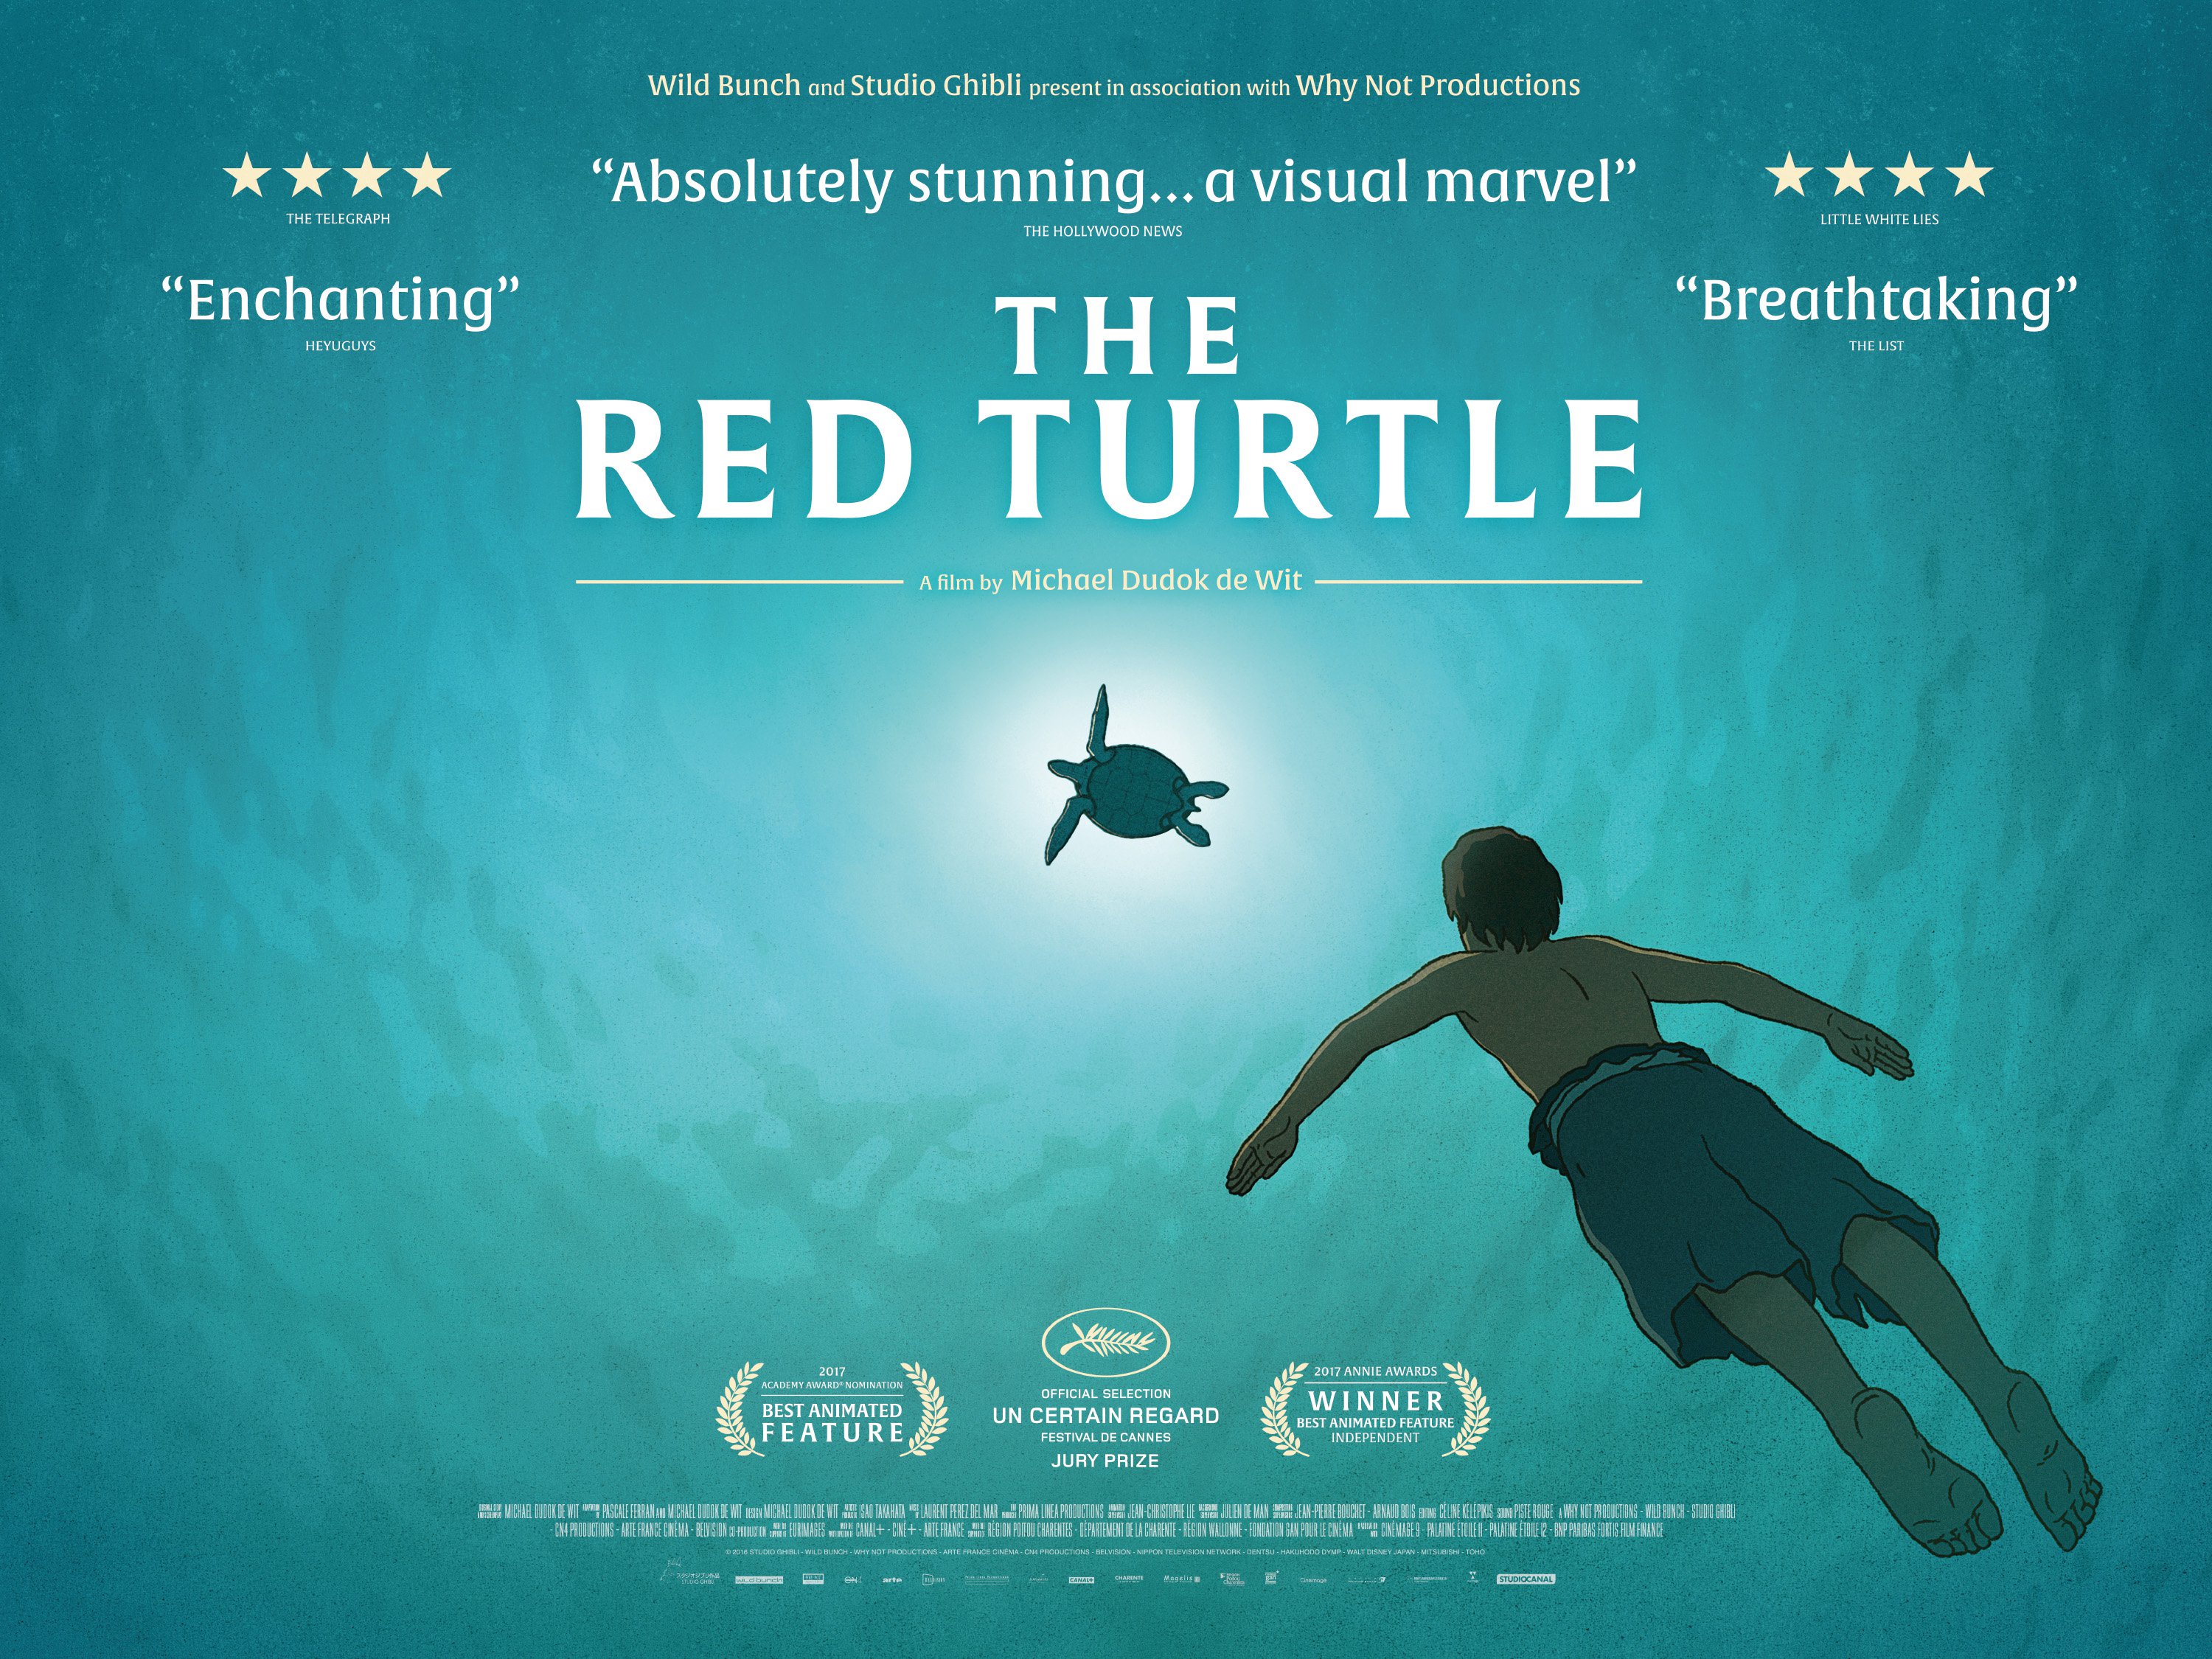 The Red Turtle film review: the circle of life in all its beauty